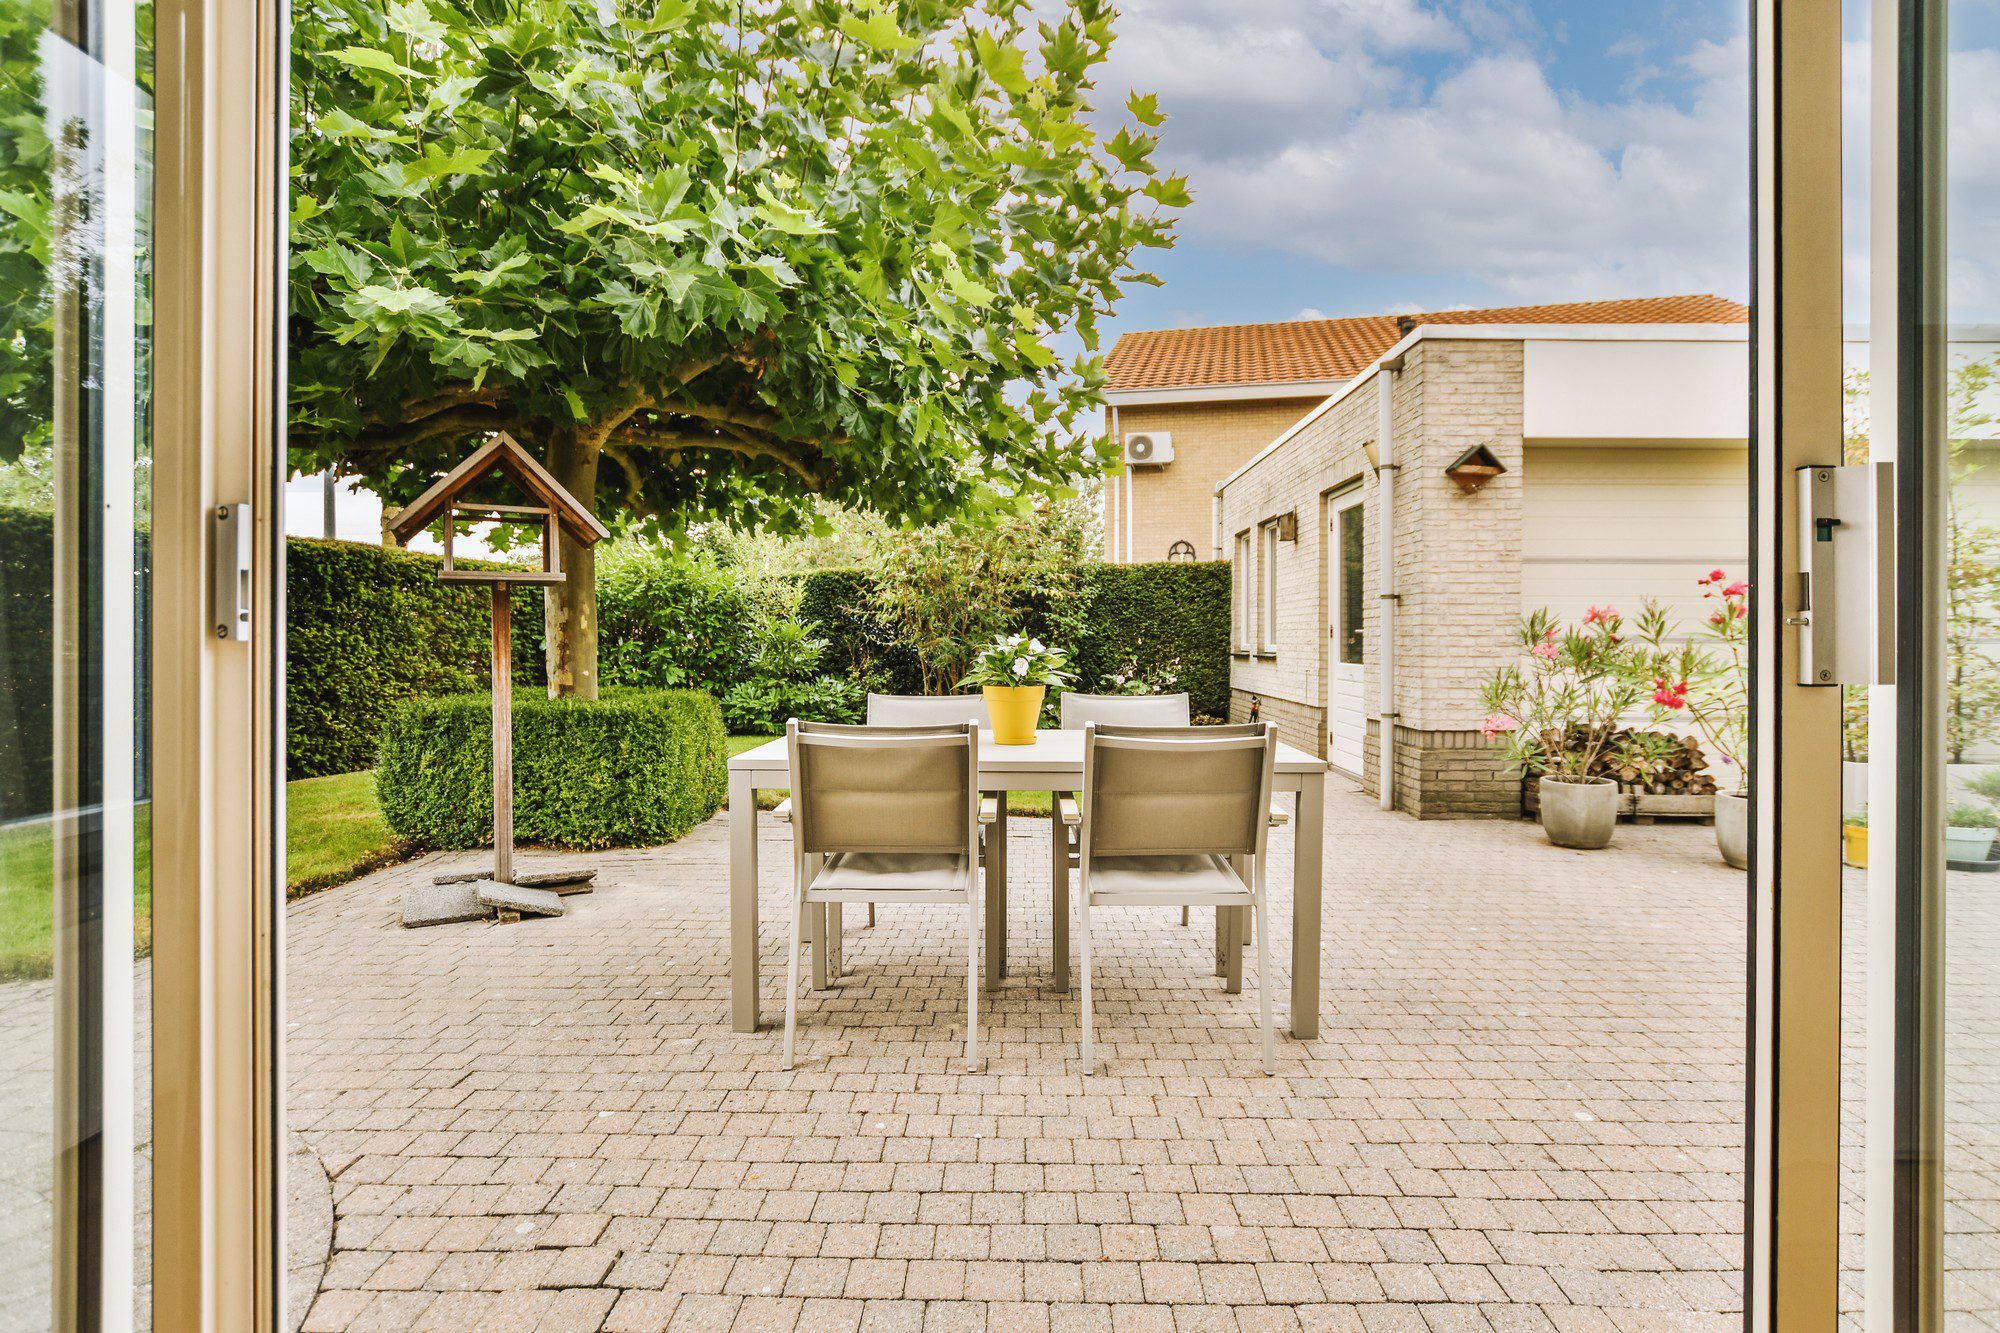 The image shows a patio area of a residential home. In the centre, there is an outdoor dining table with four chairs around it, set on paving stones. On the table is a potted plant in a yellow container, adding a touch of colour to the scene. Above the table is a large leafy tree, providing shade and greenery. To the left of the table, there is a birdhouse on a stand, and behind that, a neatly trimmed hedge.In the background, you can see the exterior of a house with a brick facade, windows, and a small section with lighter wall cladding or paint. There is a security camera mounted on the wall. In front of the house, there are more potted plants, some of which are flowering, enhancing the garden's aesthetic. The view is framed by an open glass door on the left, suggesting that the photo was taken from inside the house looking out onto the patio. The sky is partly cloudy, indicating a day with a mix of sun and clouds.